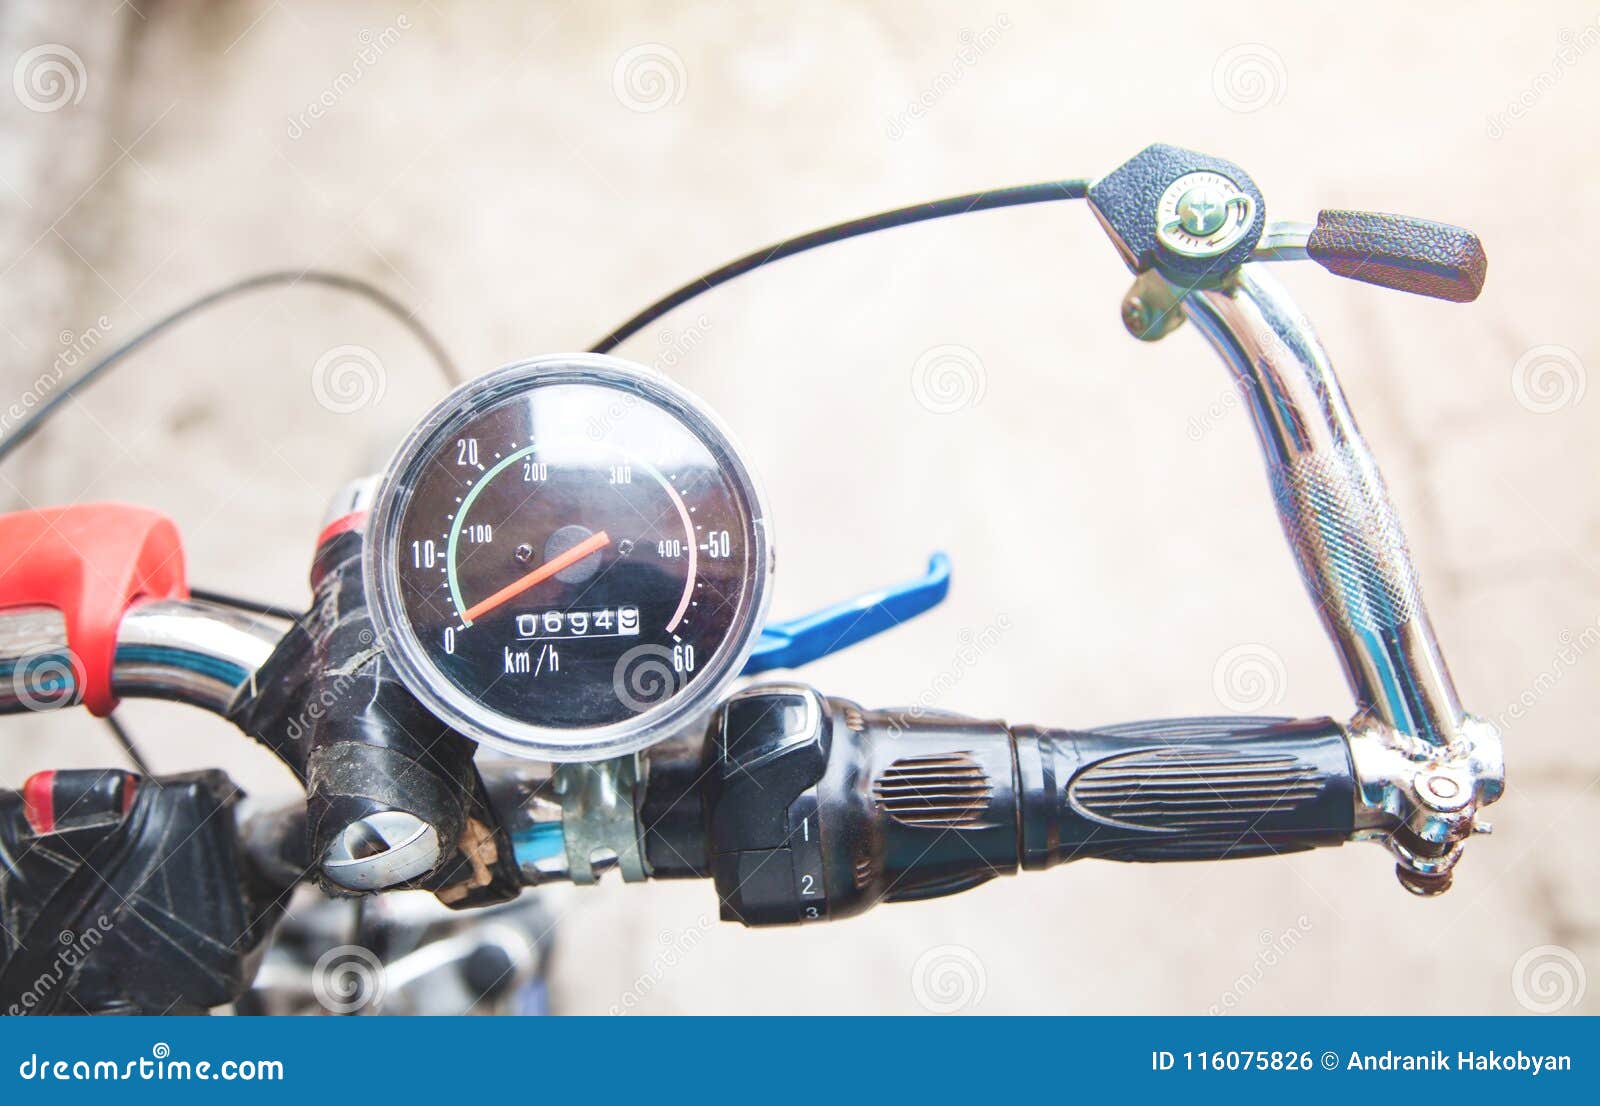 Speedometer on the Bicycle. Stock Photo Image of ride, background